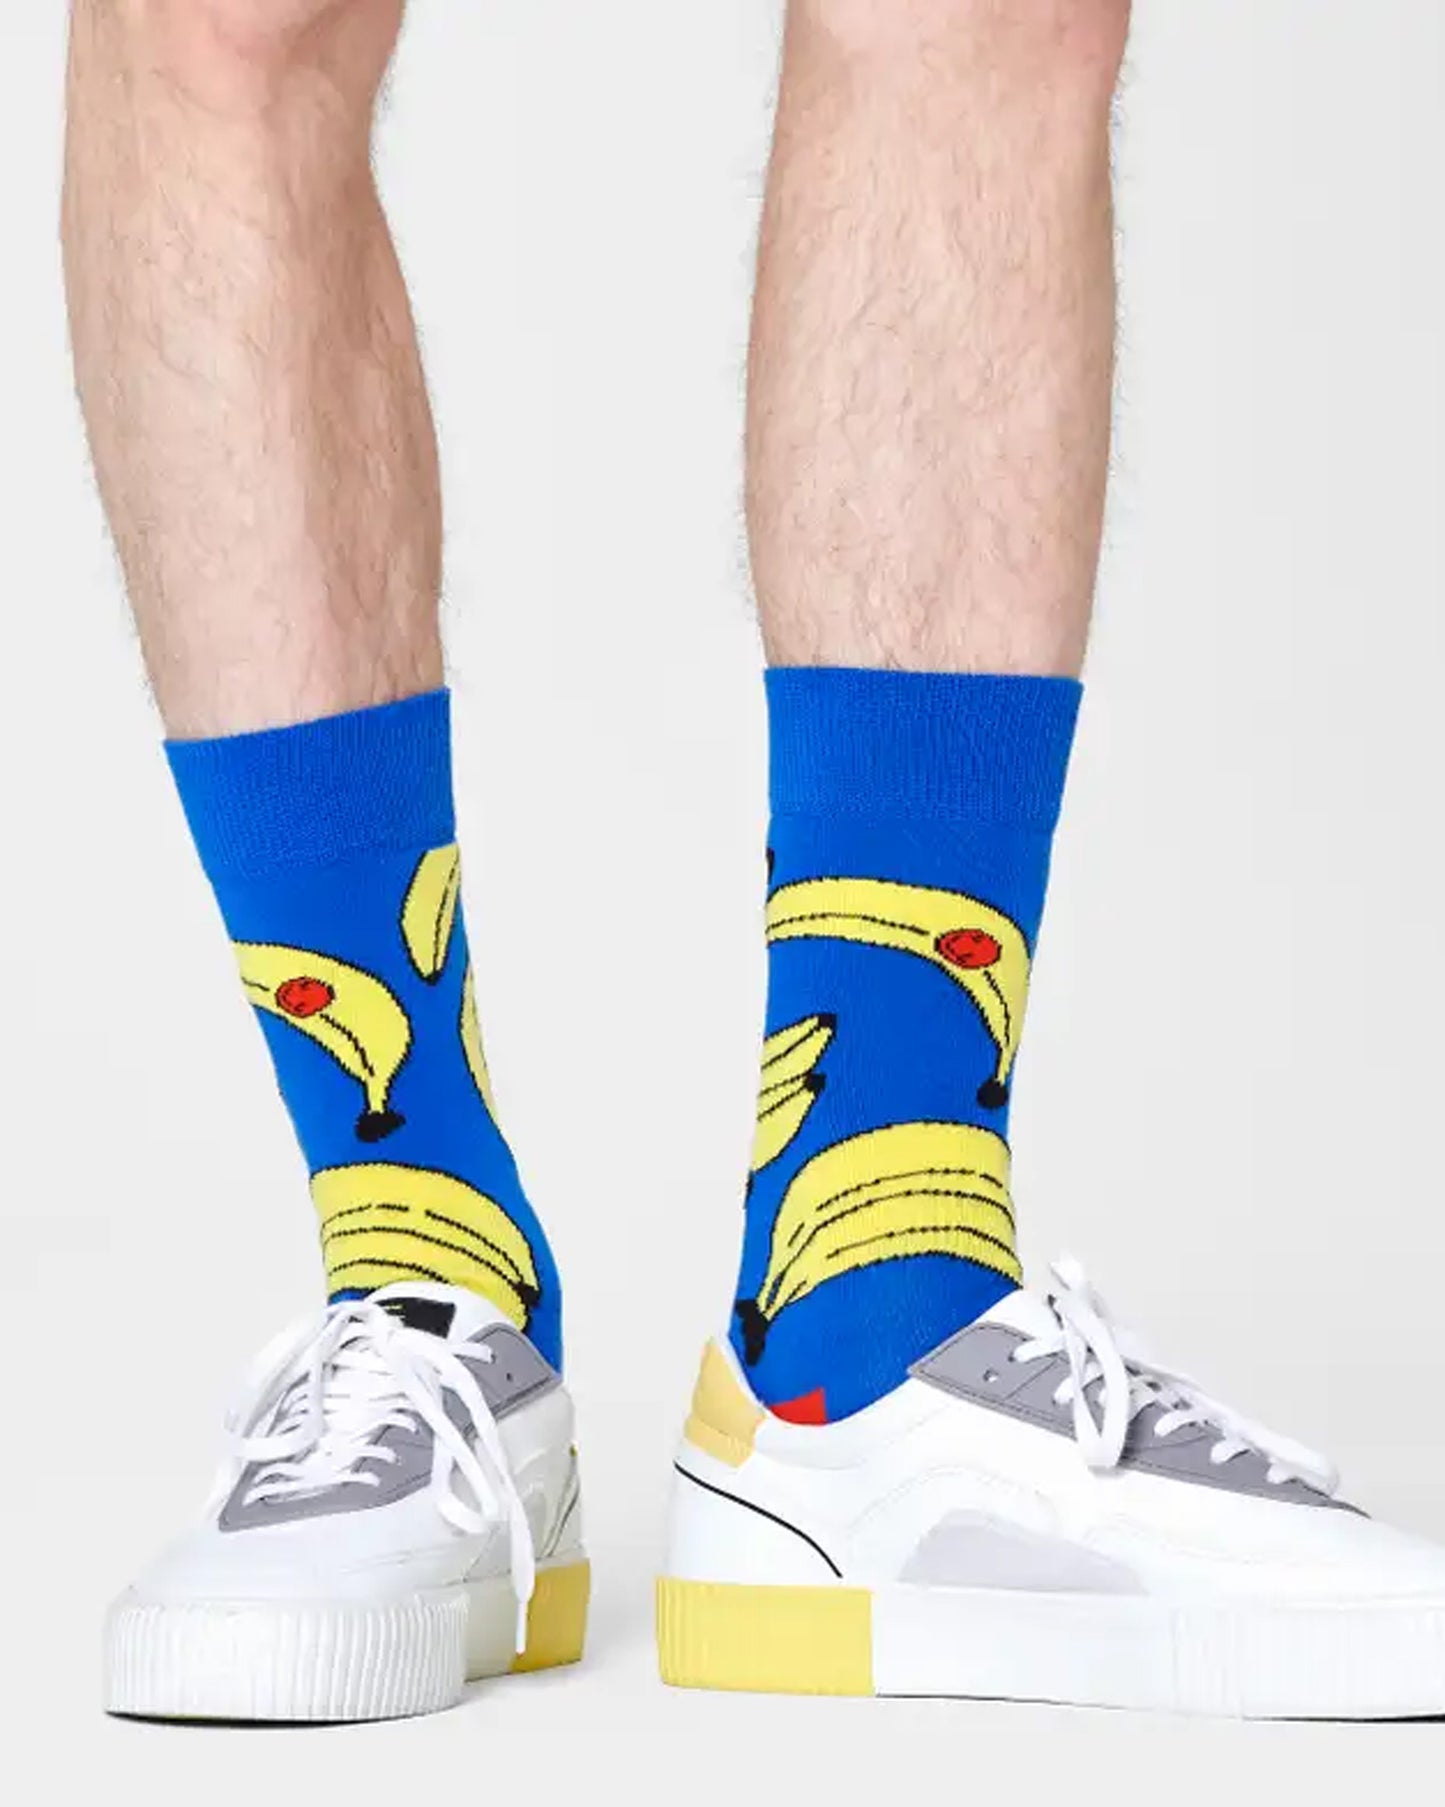 Happy Socks BAN01-6300 Bananas Sock - Bright blue cotton mix crew length ankle socks with a large banana pattern in pale yellow and black with orange smiley face, worn by a man wearing sneakers.